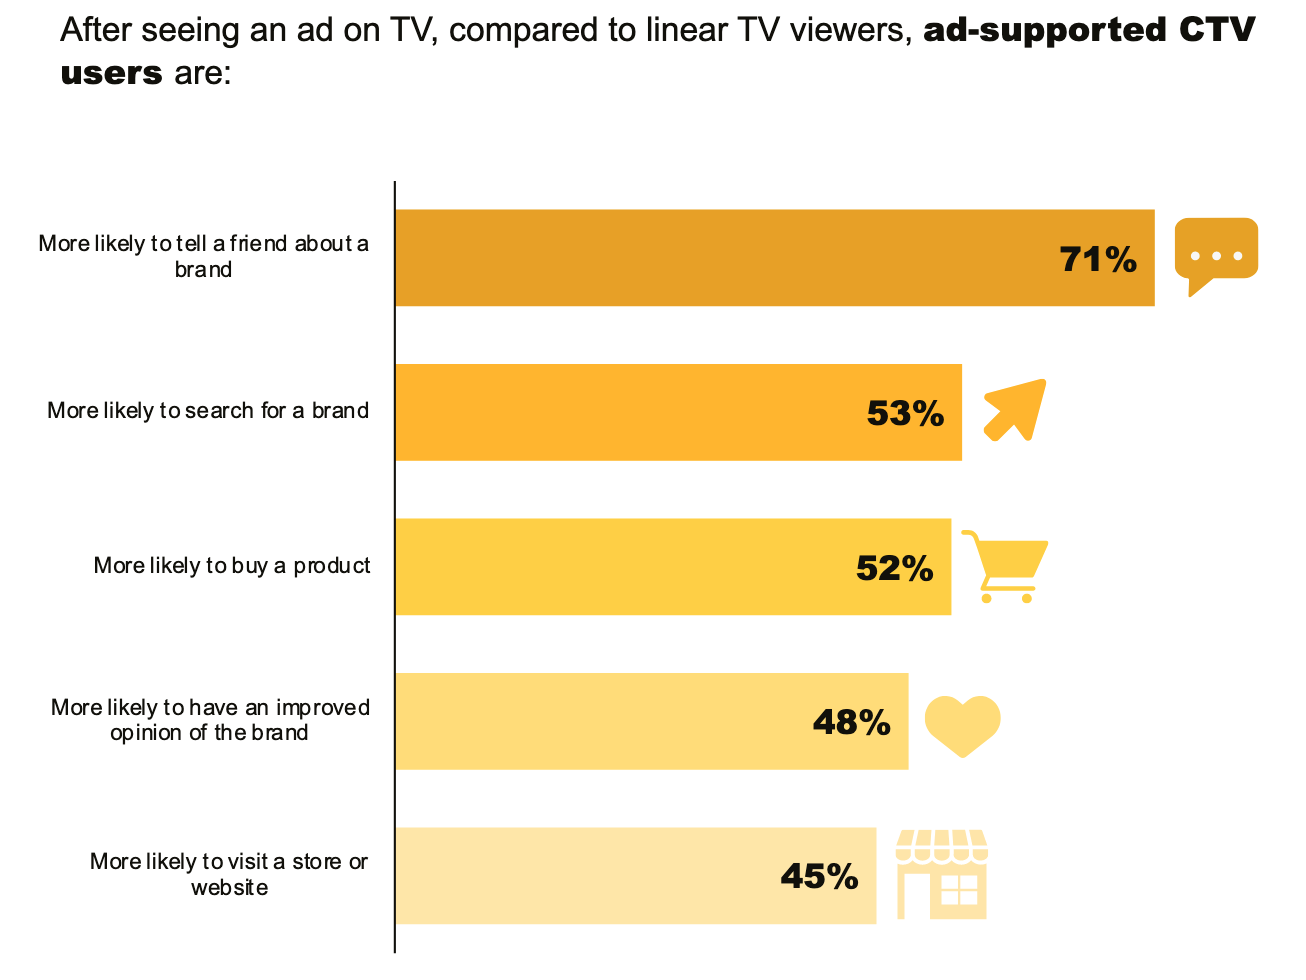 Research finds CTV to be more effective than Linear TV in driving consumer behaviors